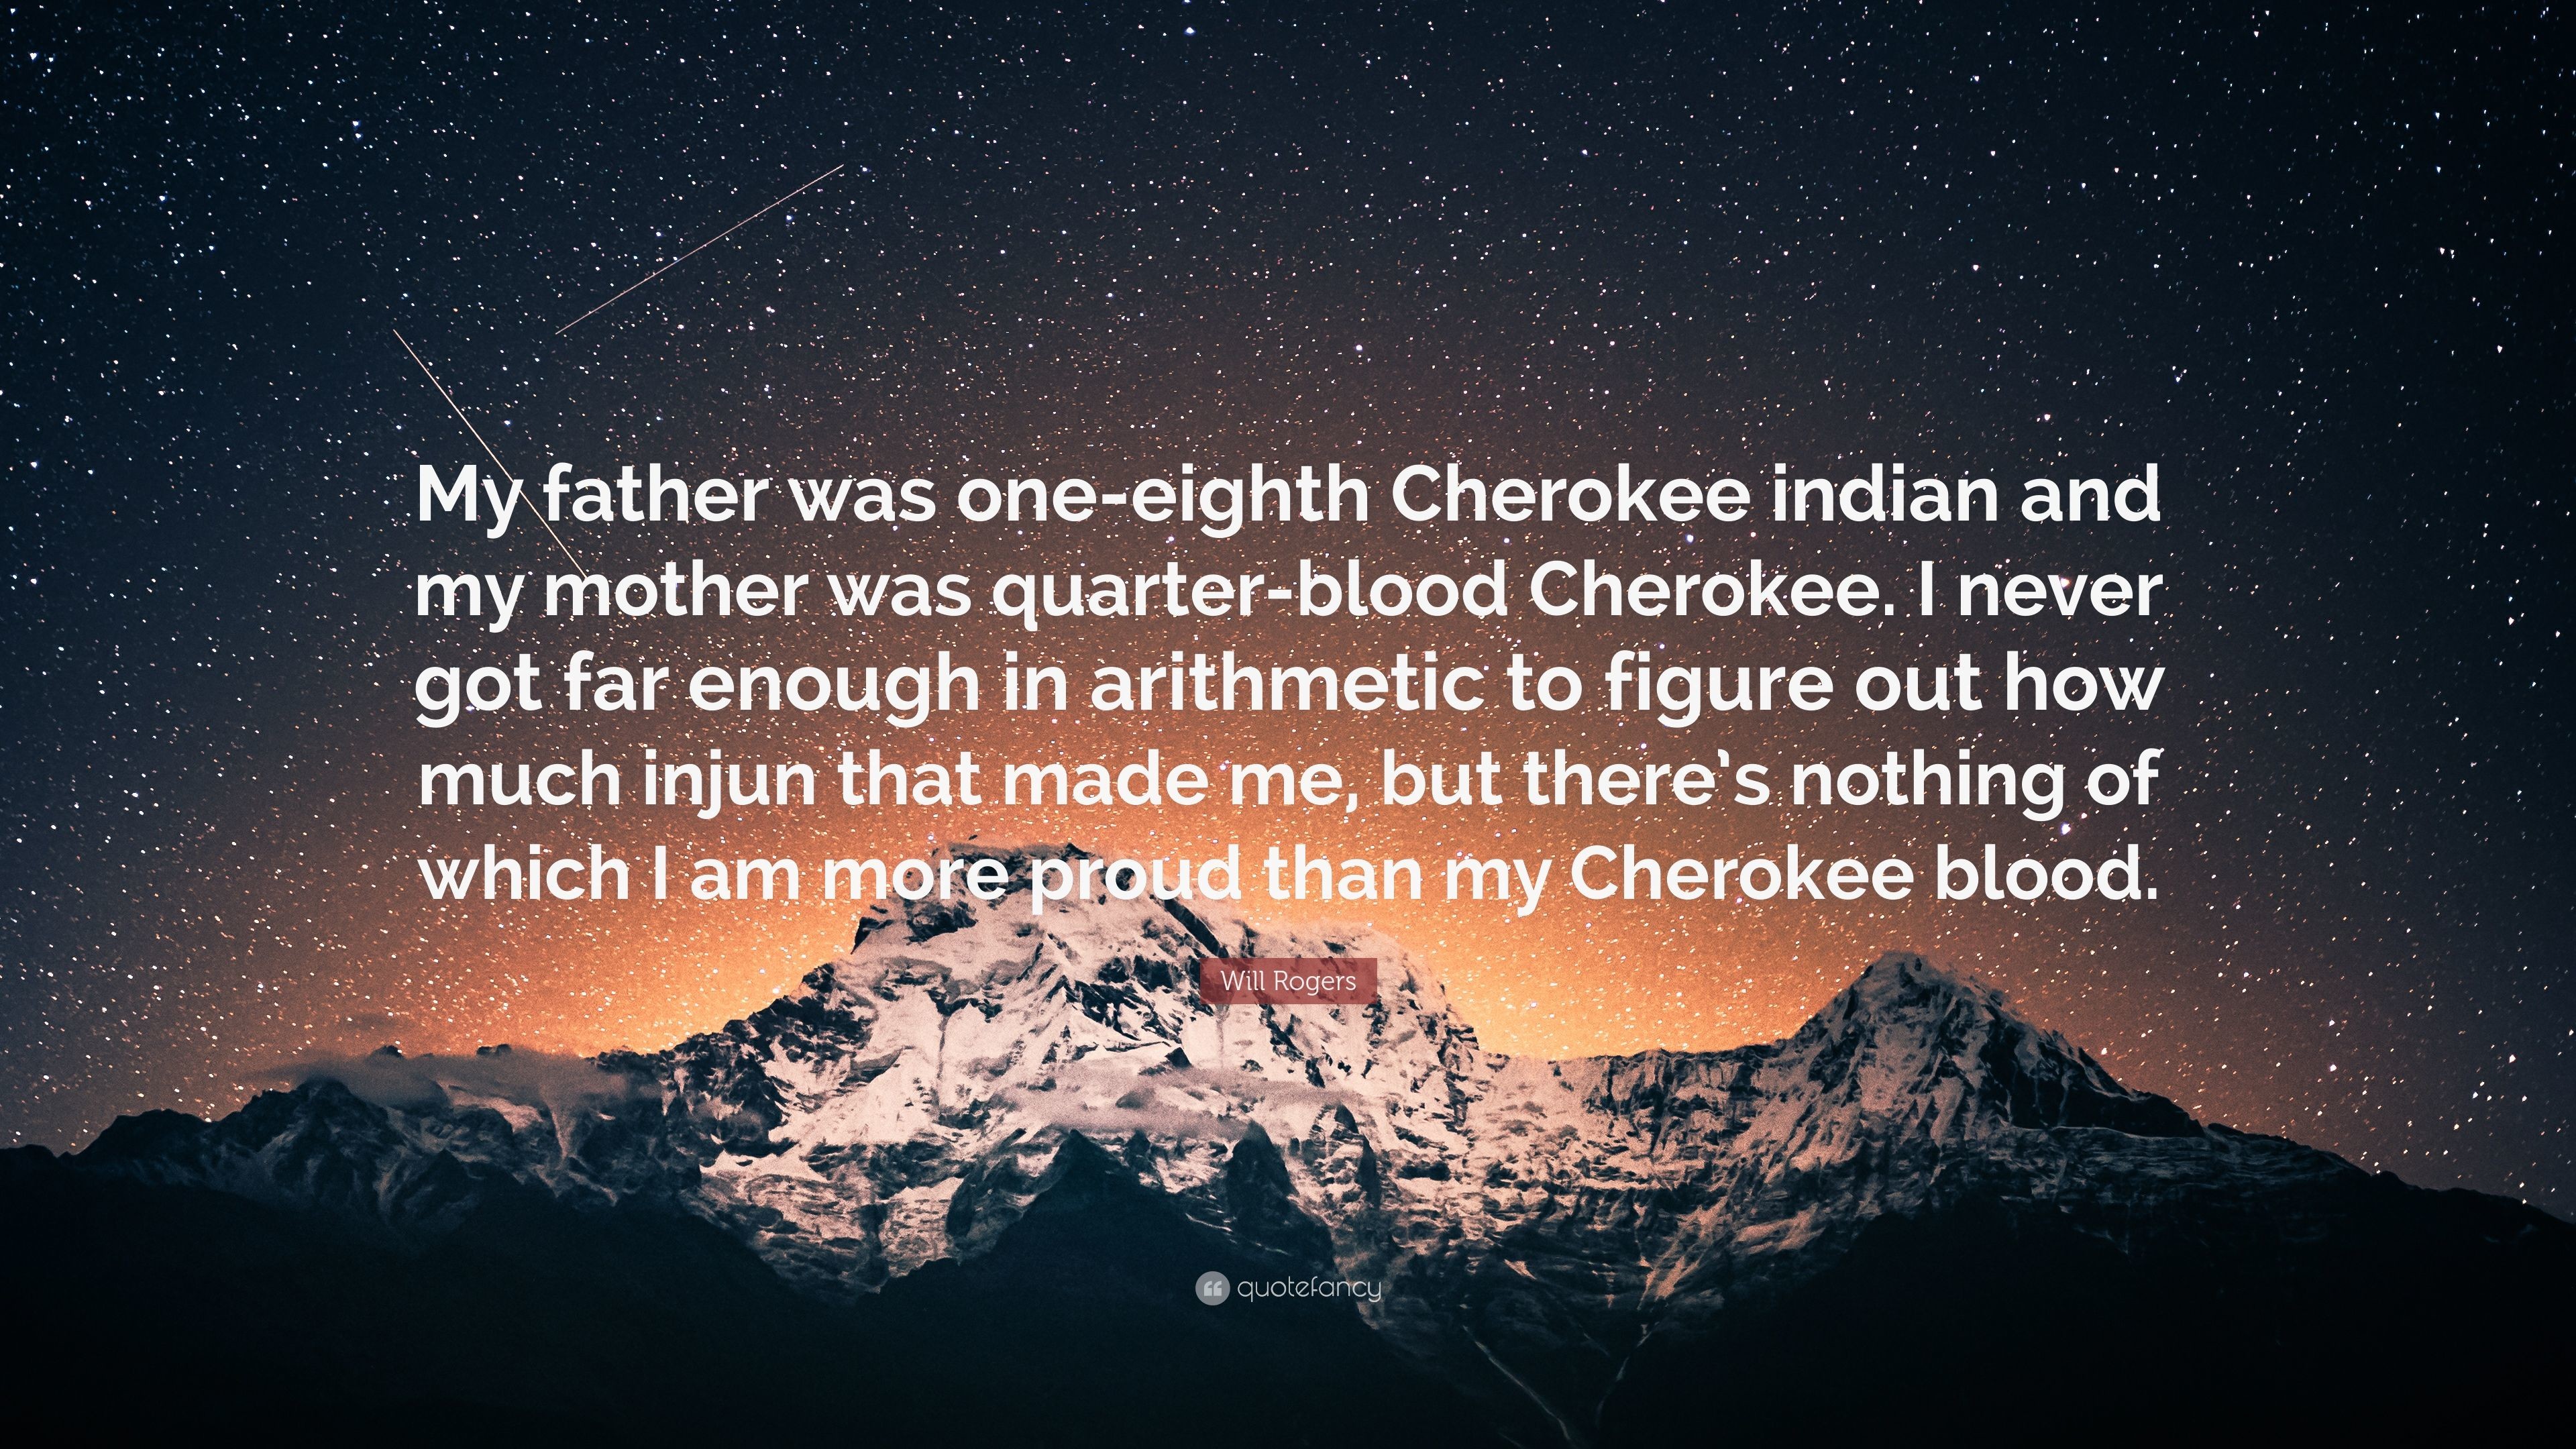 3840x2160 Will Rogers Quote: “My father was one-eighth Cherokee indian and my mother